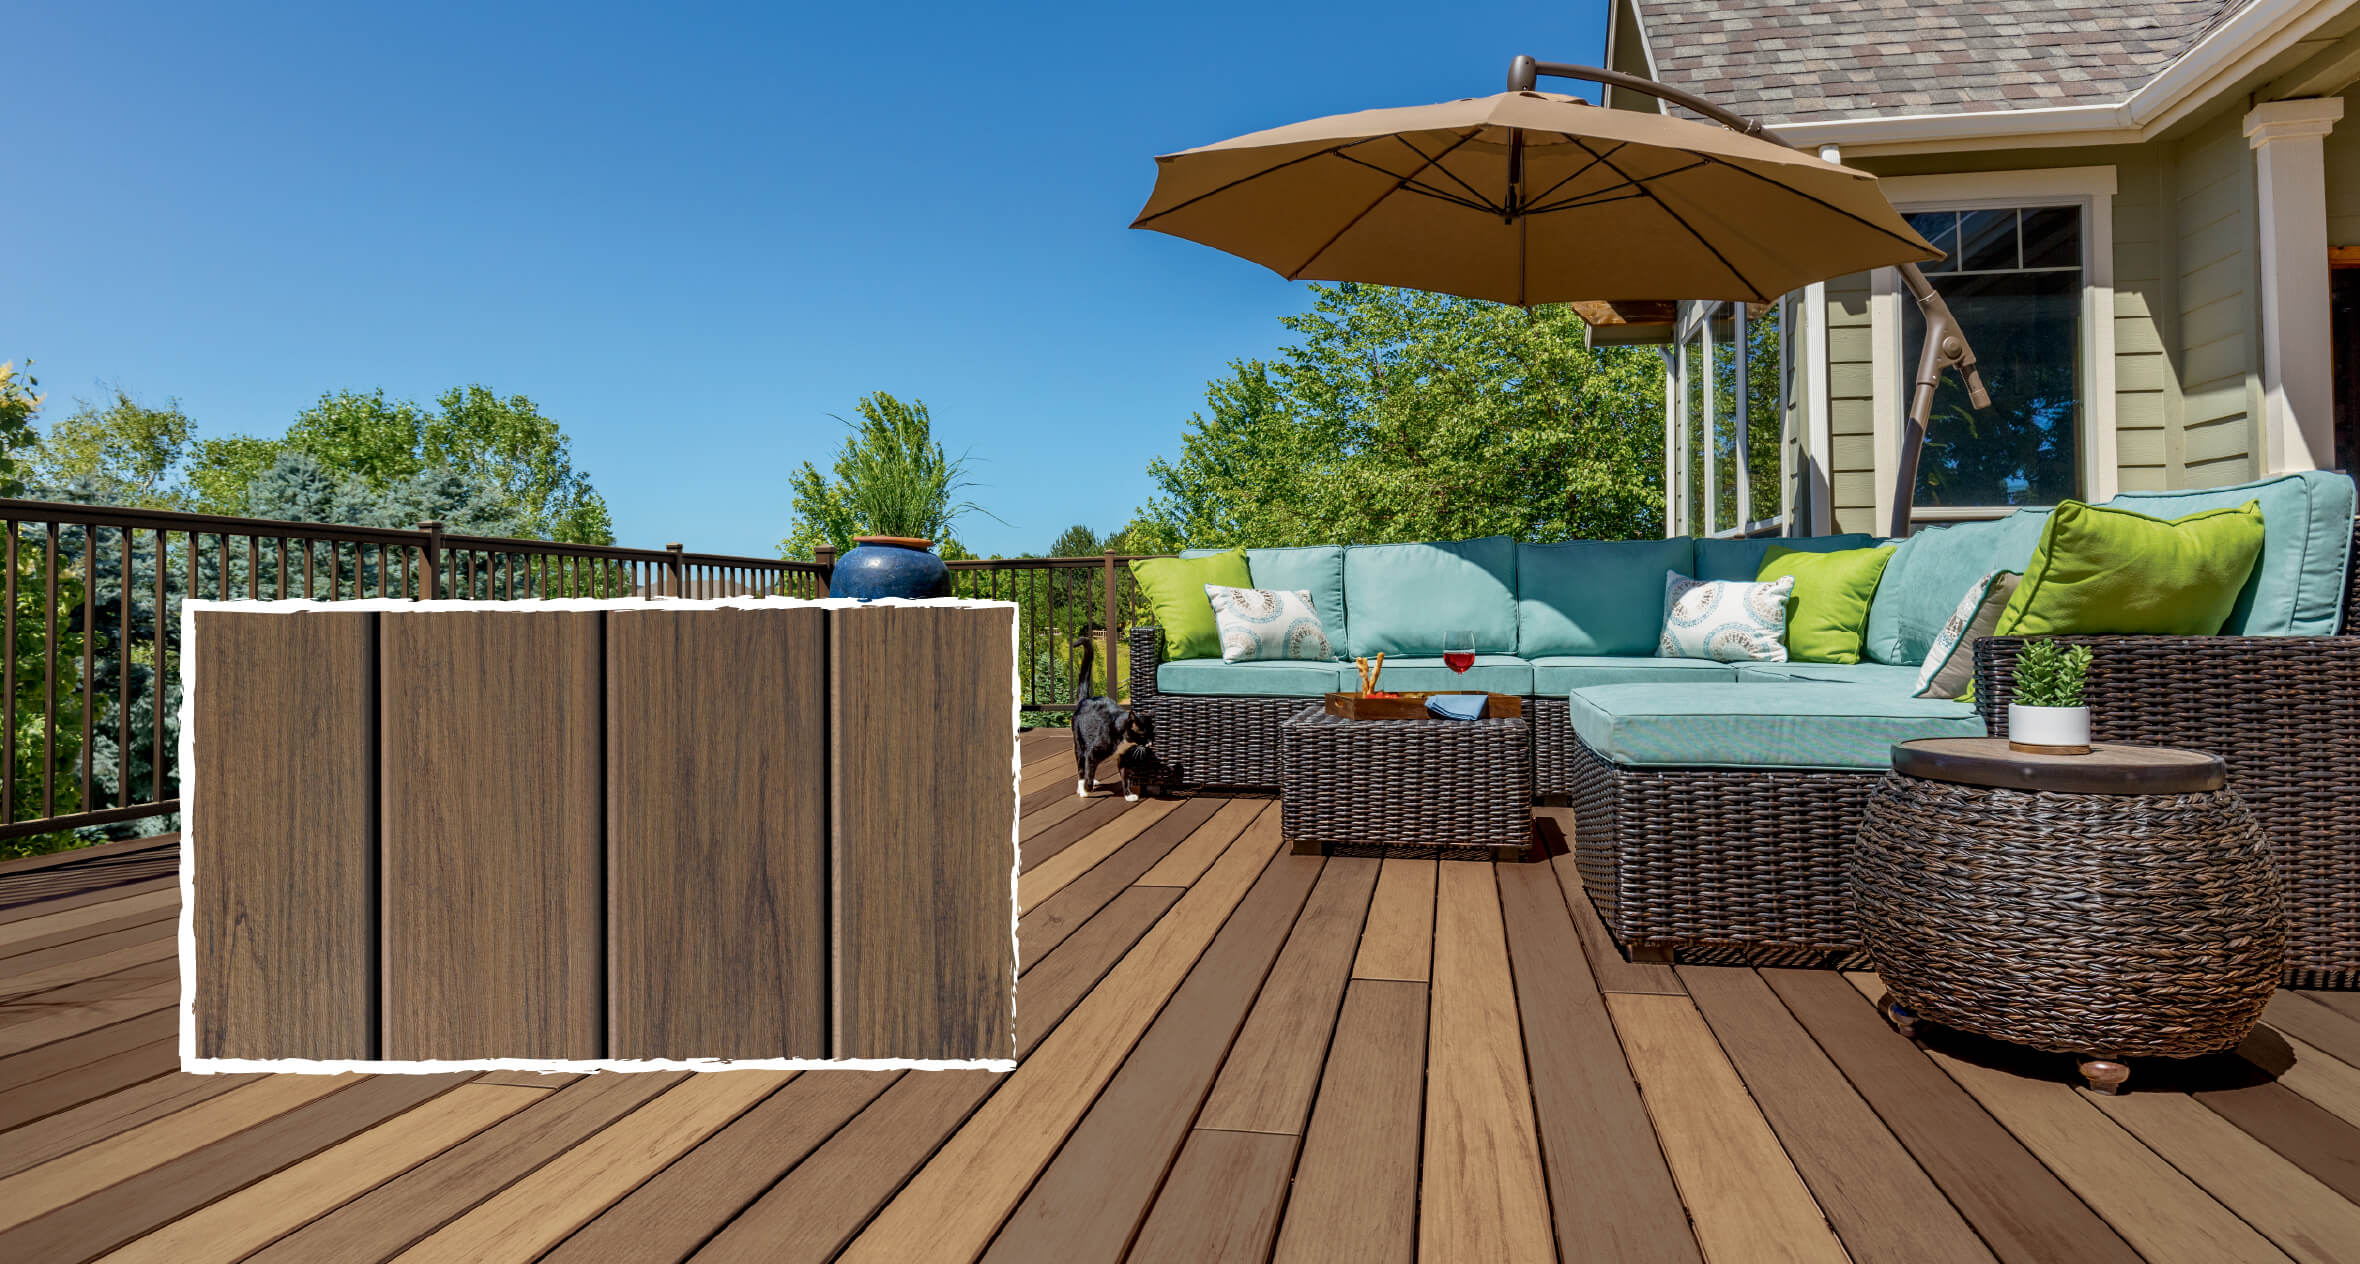 An example of a composite deck with mixed-color decking boards and a blue patio sectional.